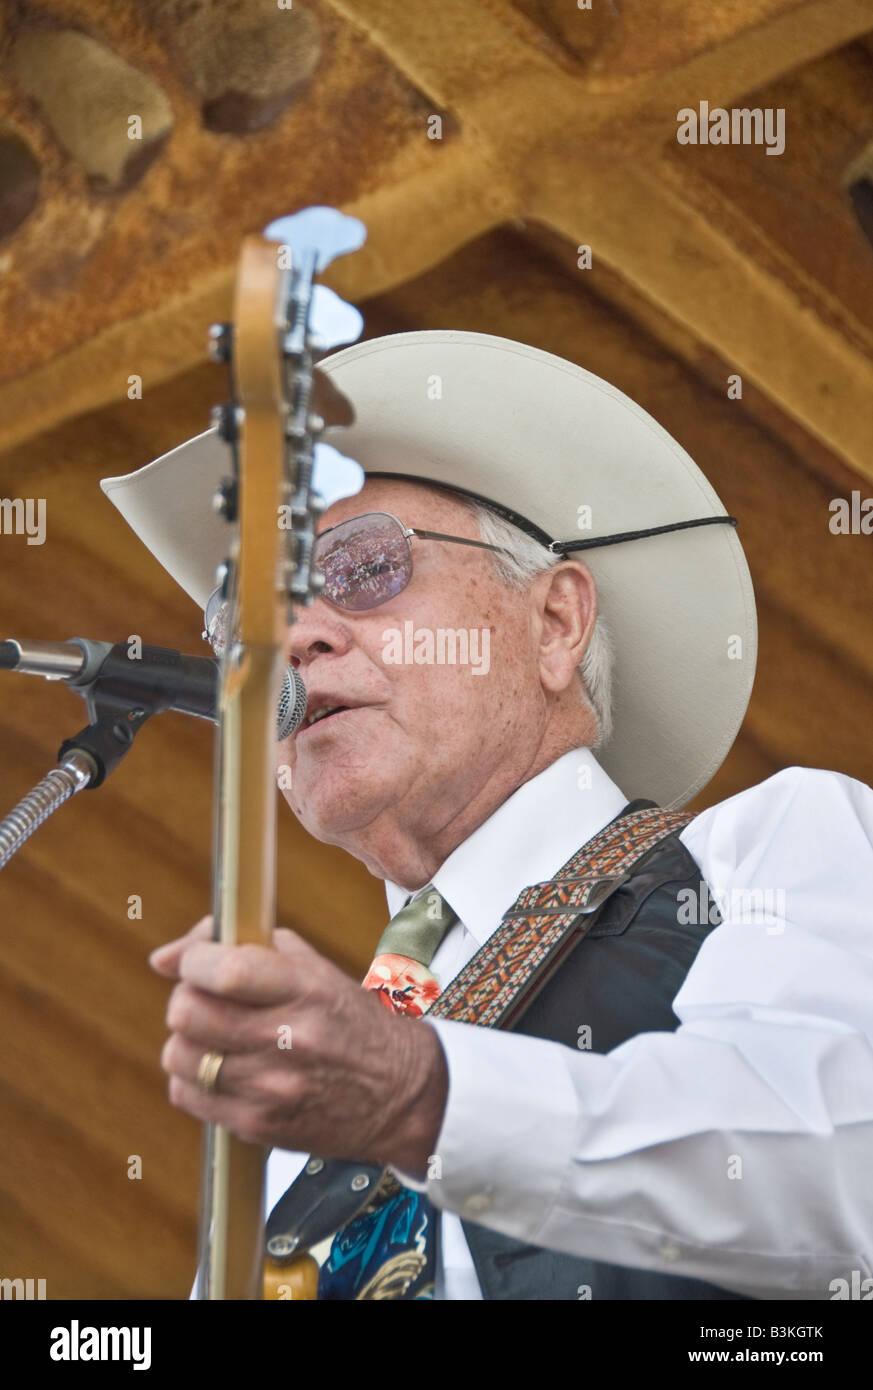 Texas Turkey annual Bob Wills Day celebration Texas Playboys western swing band in concert guitar player guitarist Stock Photo